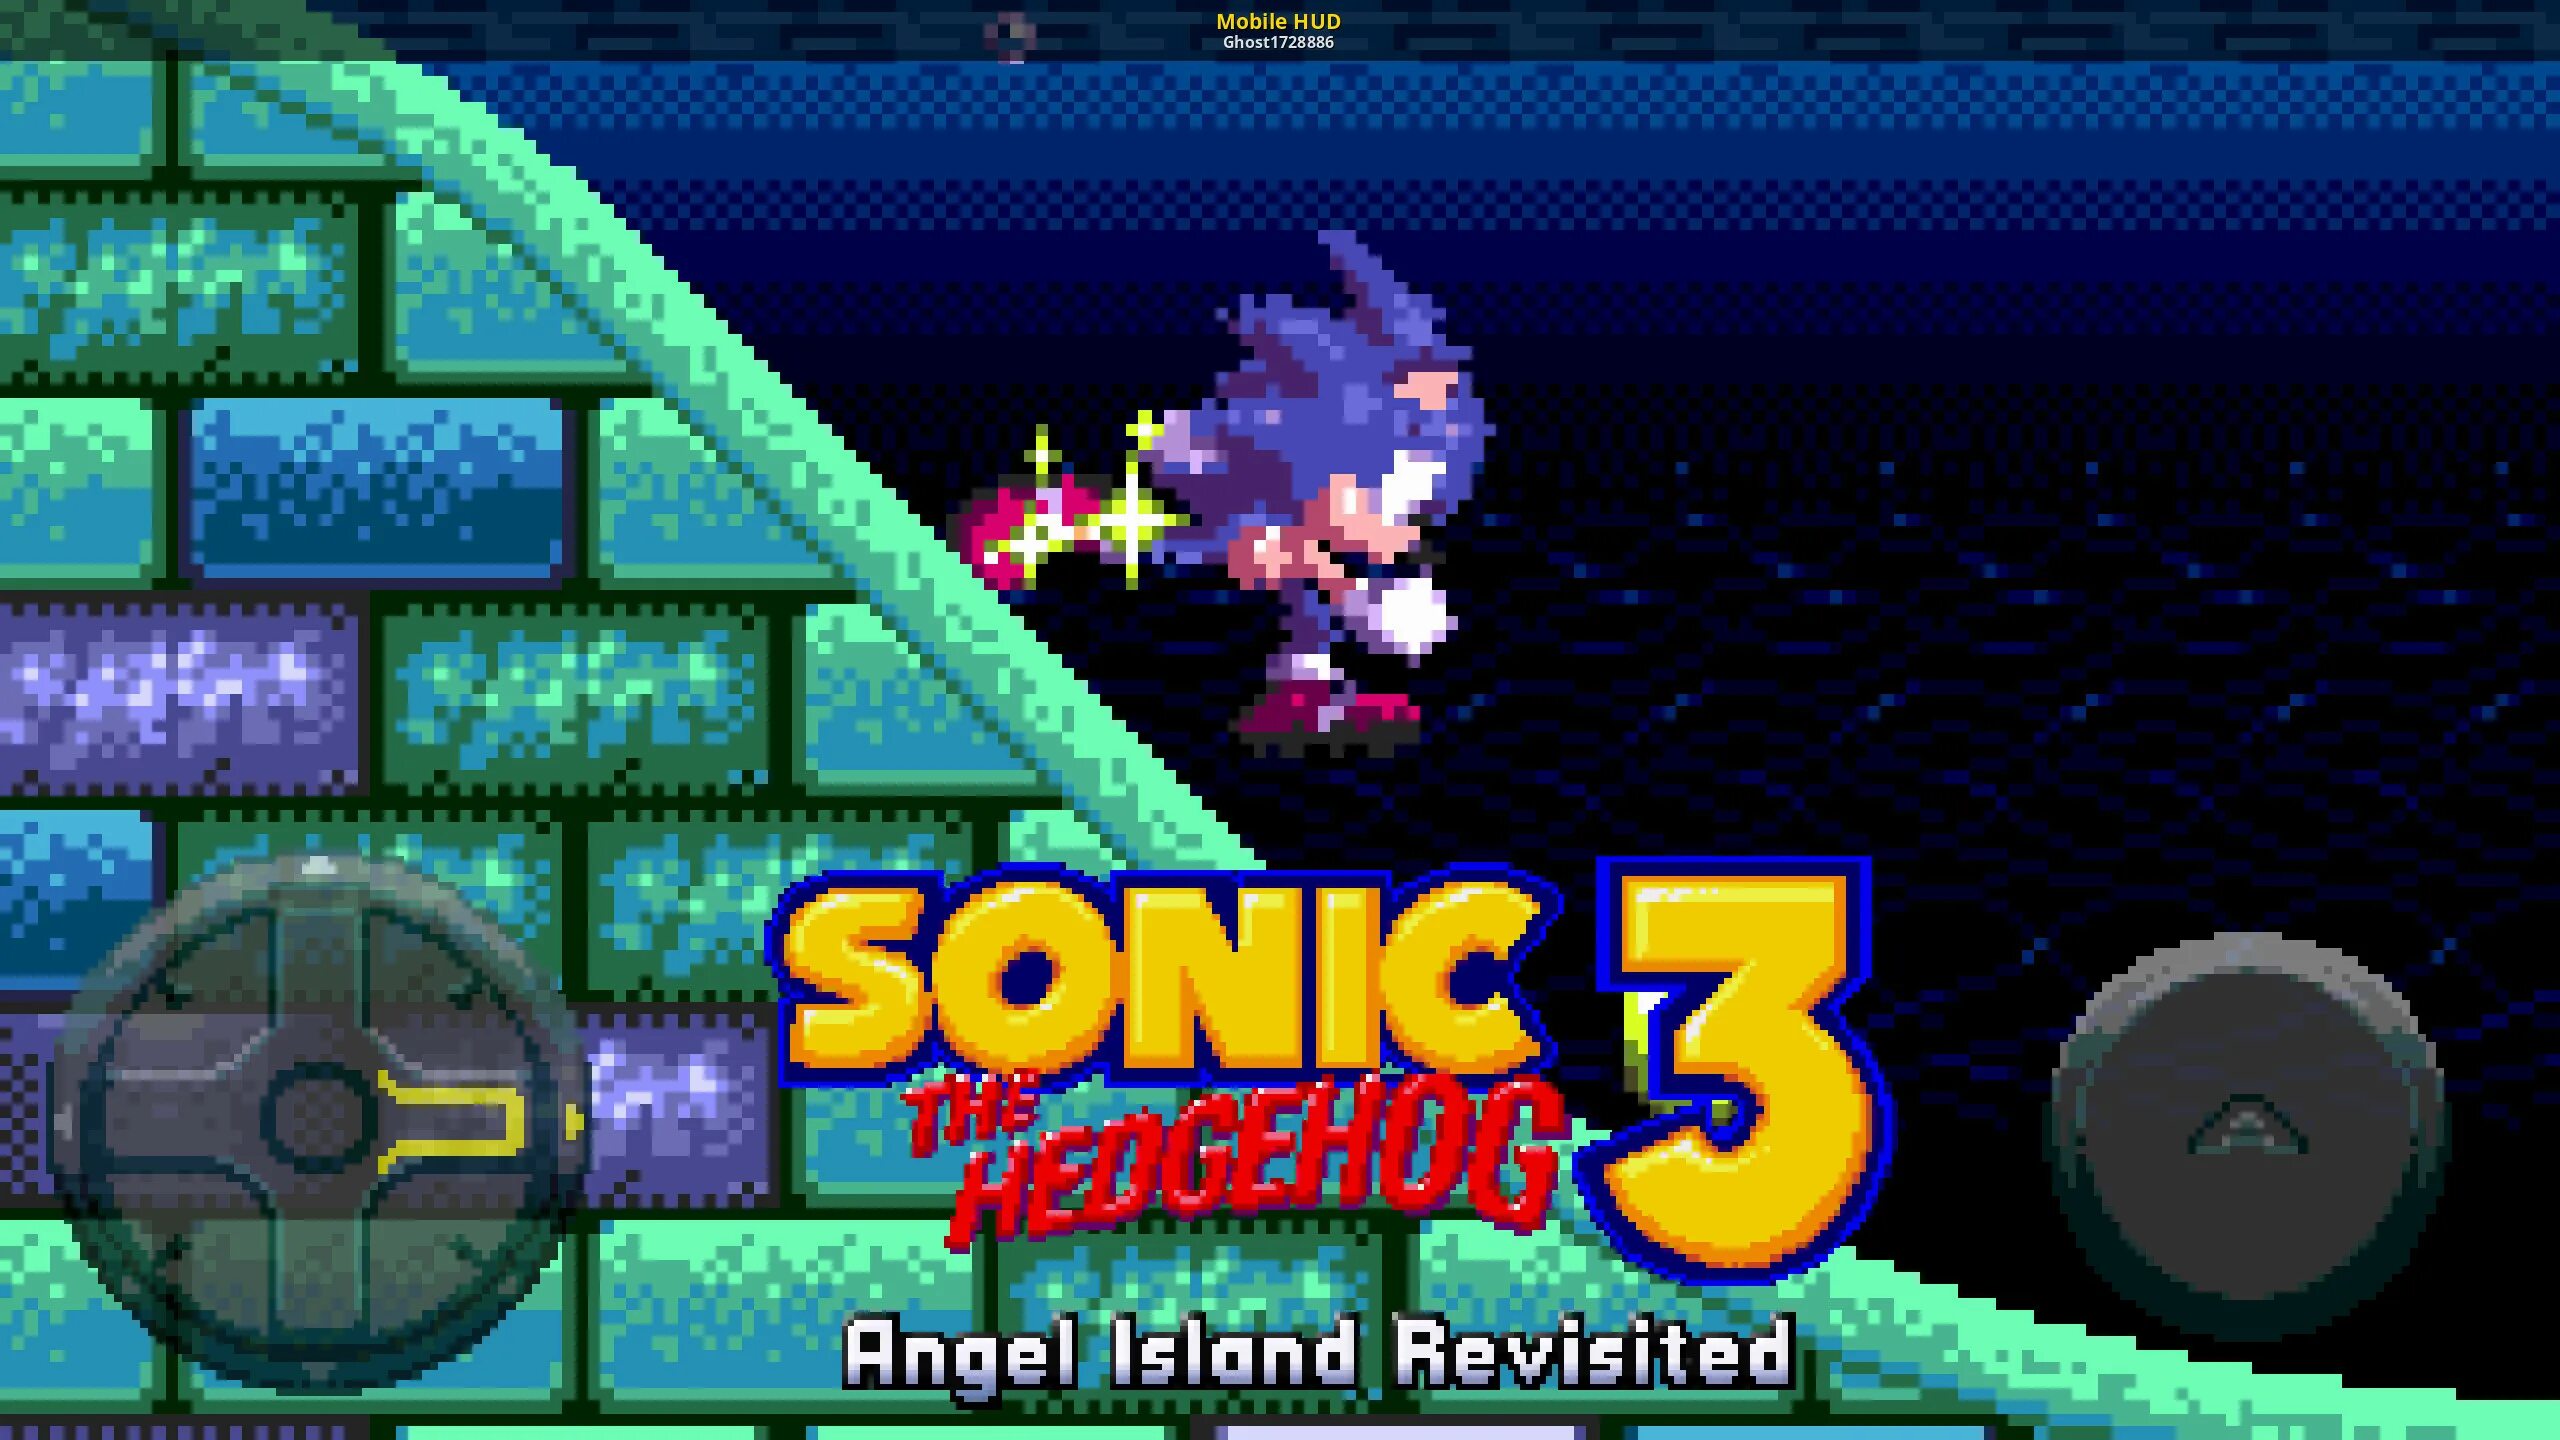 Sonic 3 Air HUD. Sonic 3 Air manual. Sonic 3 a.i.r Android. Sonic 3 Air Mania. Sonic 3 mobile